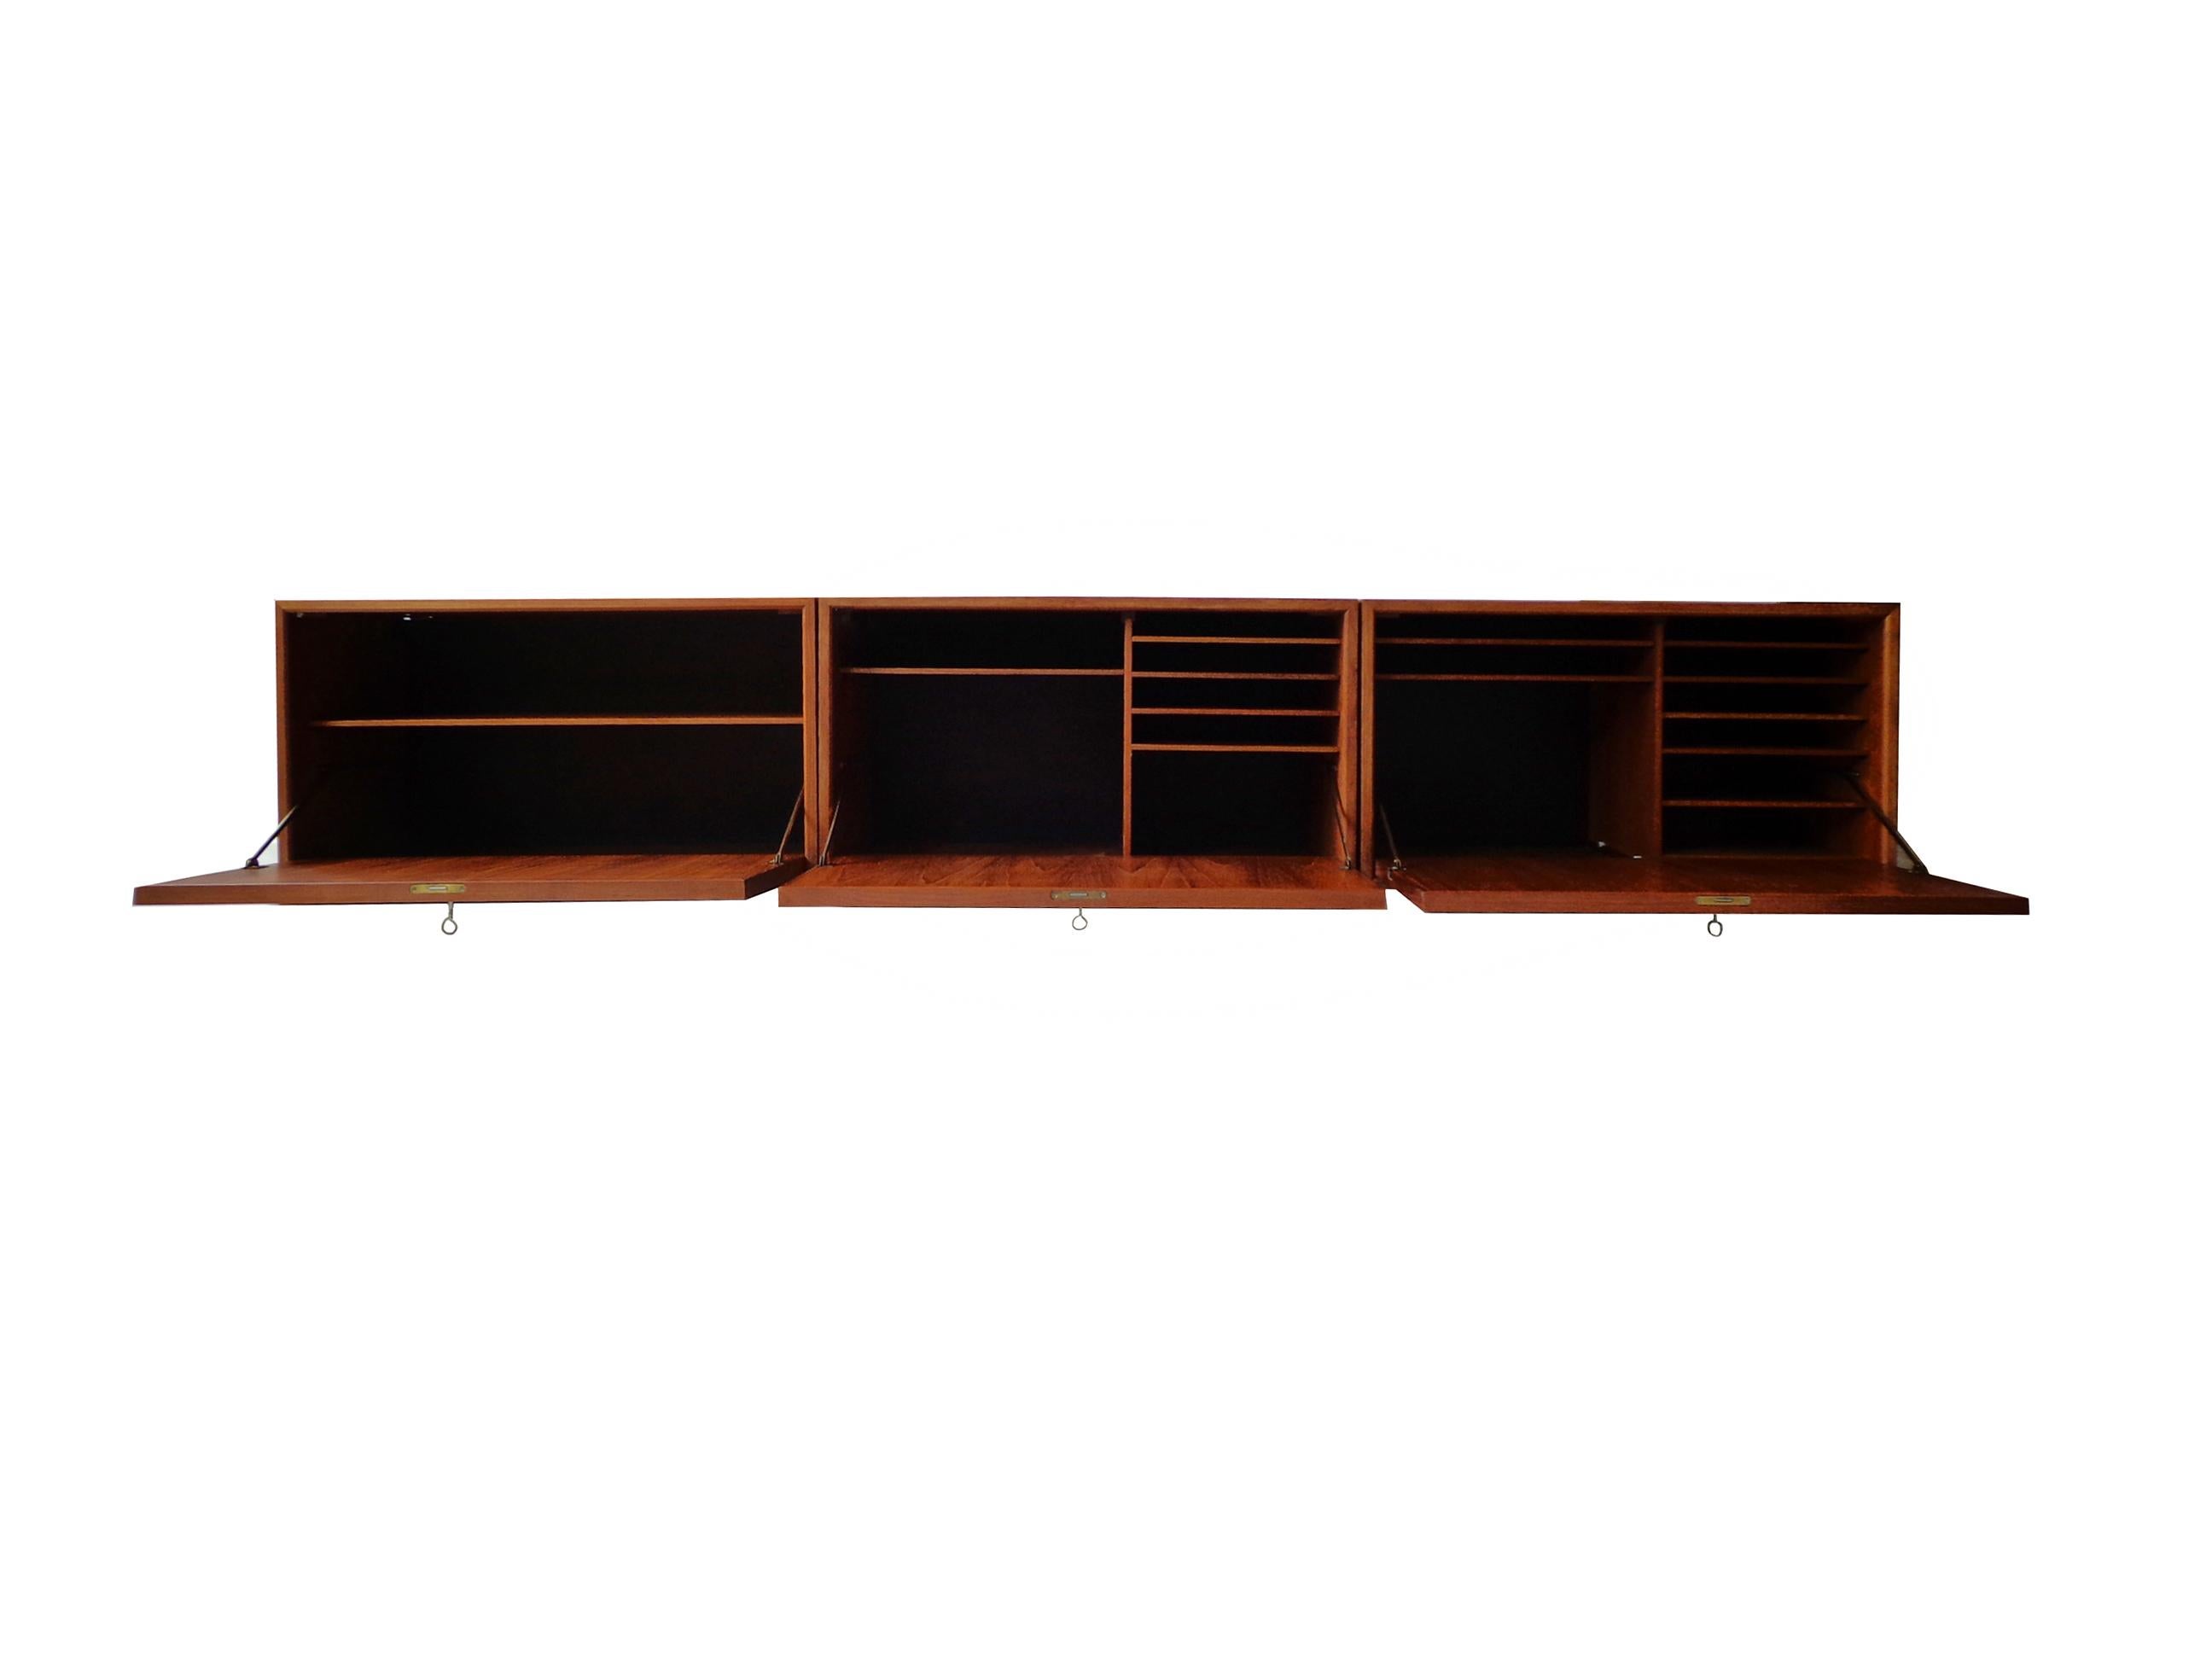 Wall-mounted cabinet of teak designed by Poul Cadovius, consisting three cabinets with door and shelves inside. Original keys included. Signed with paper makers plaquette.

Poul Cadovius created one of the world’s first wall-mounted shelving